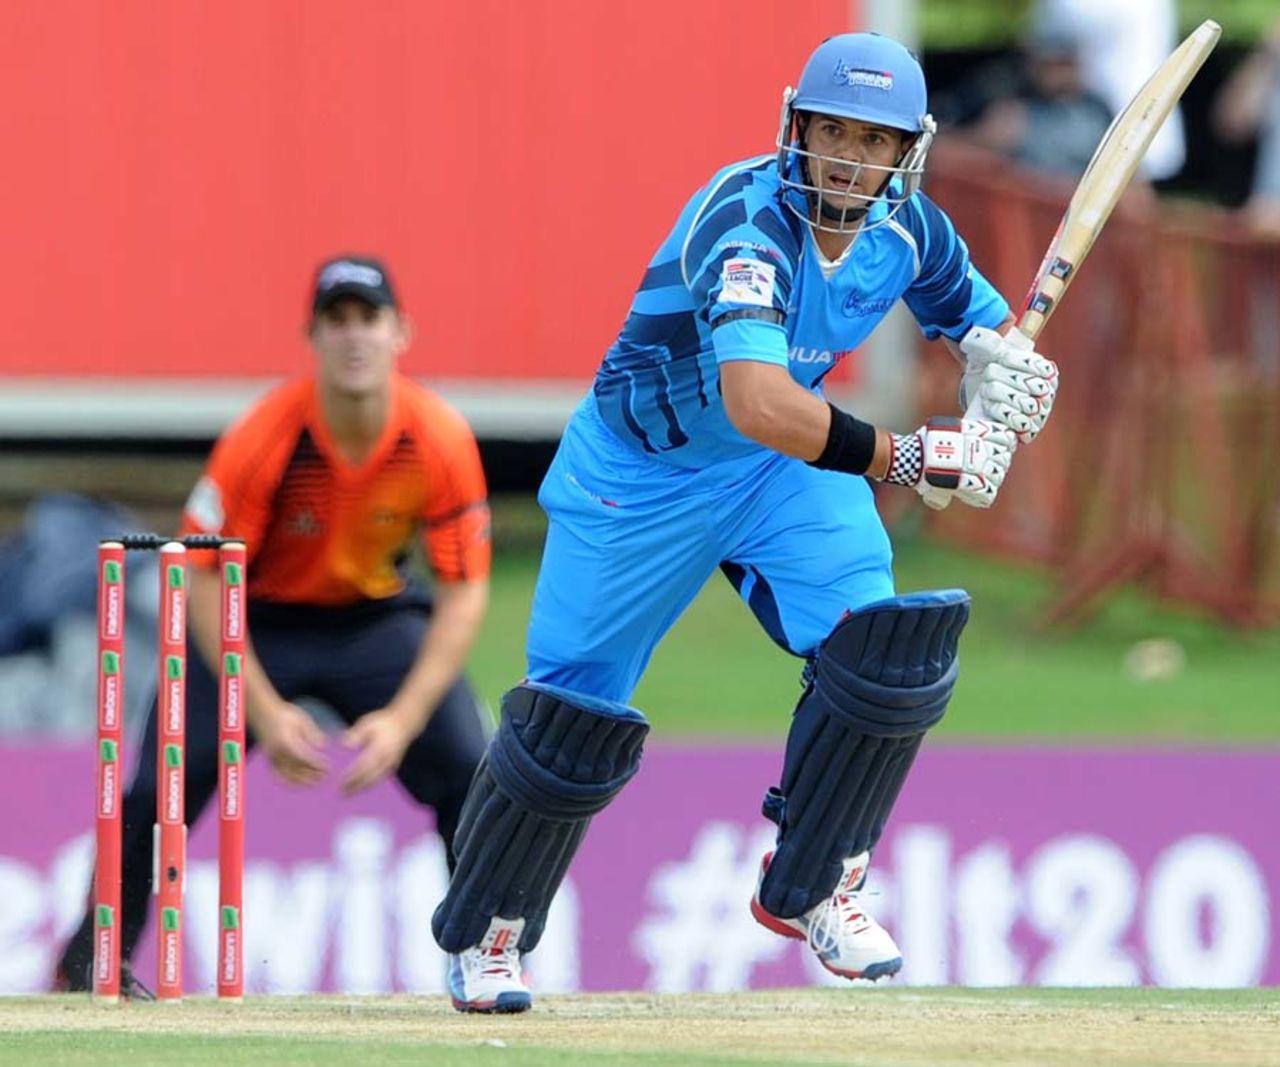 Jacques Rudolph top-scored for Titans with 83, Titans v Perth Scorchers, Group A, Champions League Twenty20, Centurion, October 13, 2012